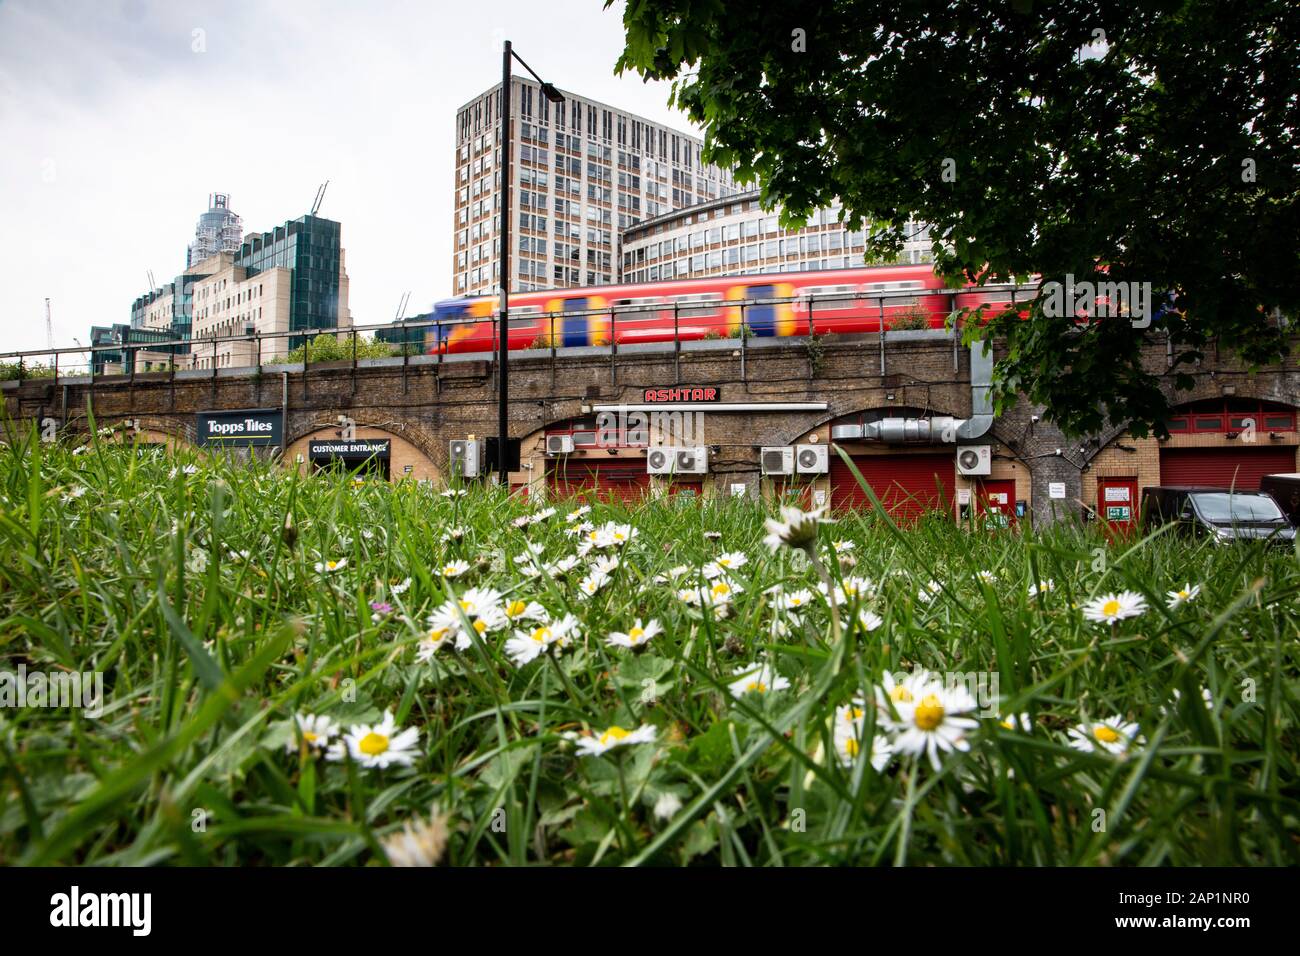 High rise buildings of the London district of Vauxhall overlook the railway's speeding trains and Vauxhall Pleasure Gardens park. Stock Photo